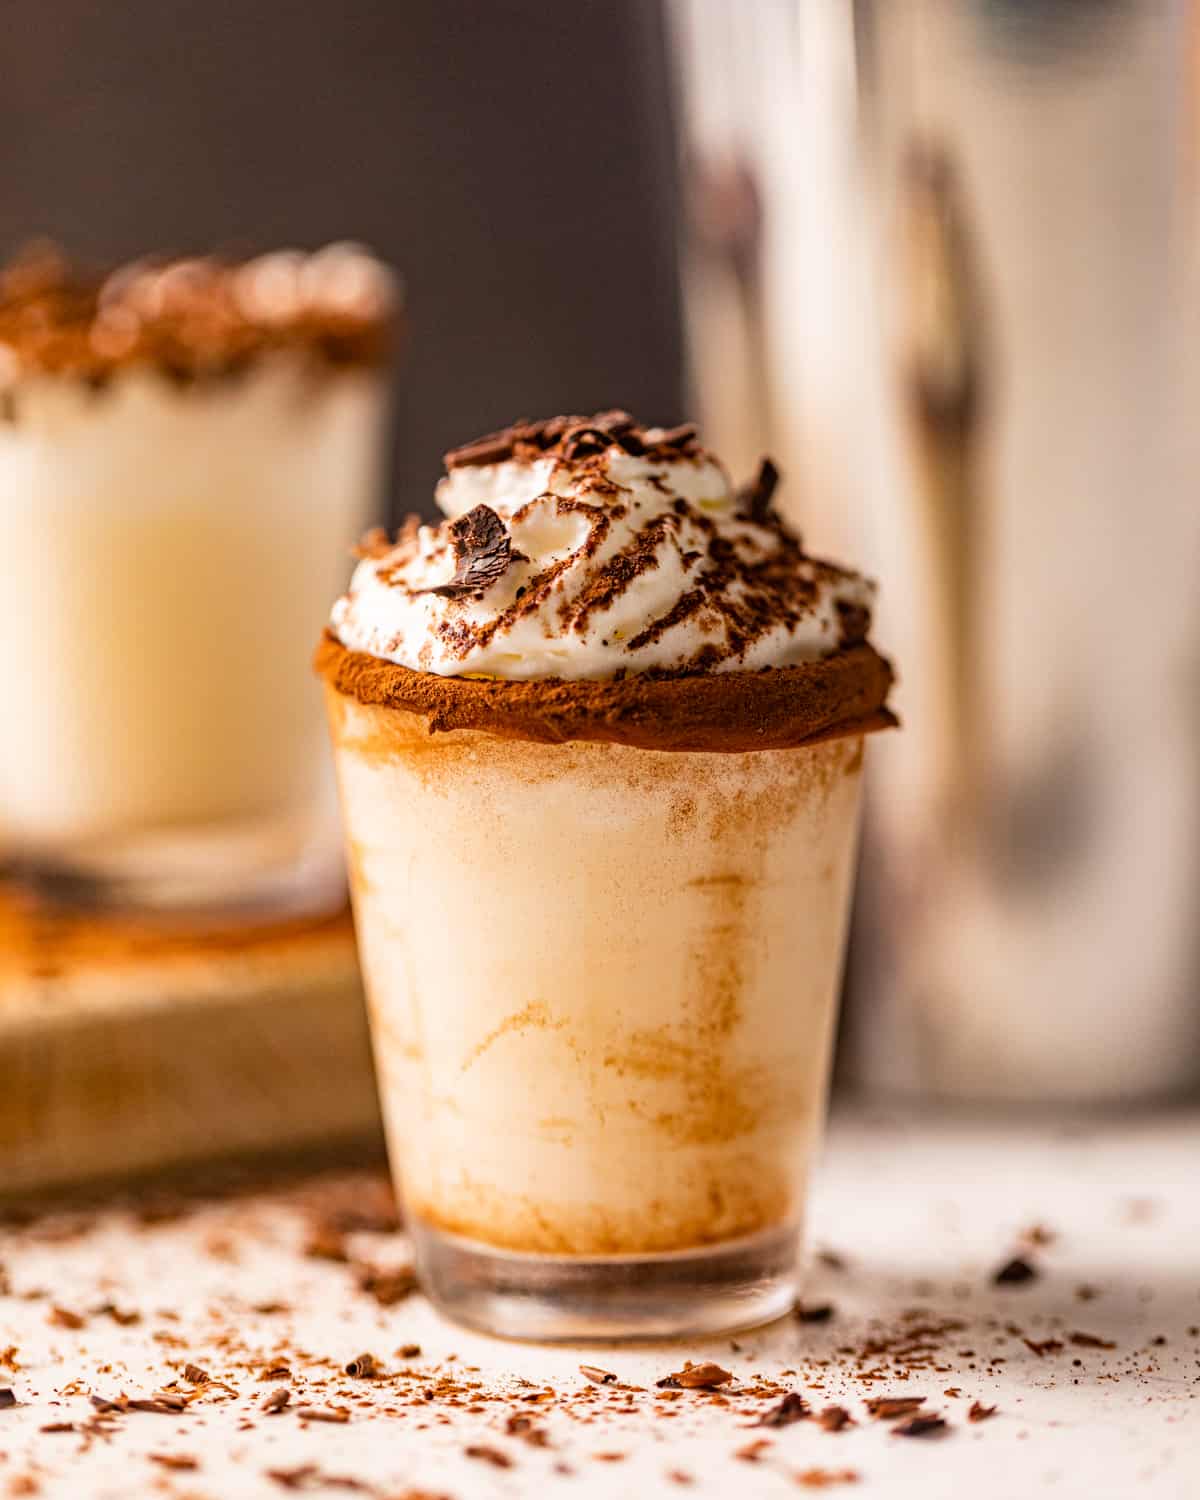 chocolate cake shot in a shot glass garnished with whipped cream and cocoa powder.